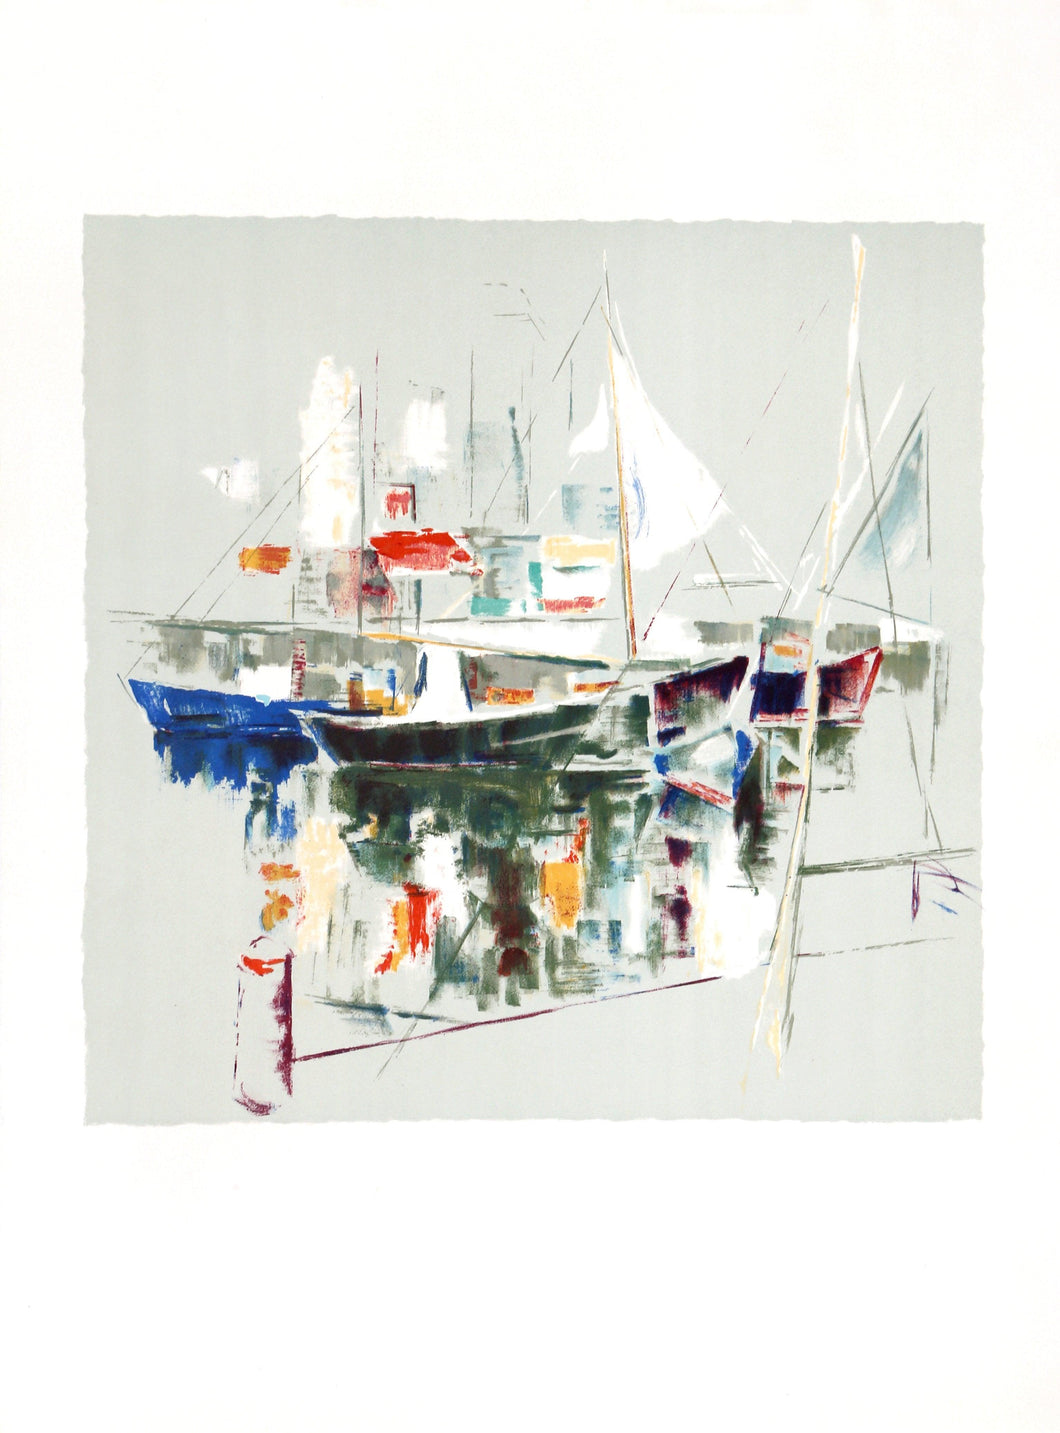 Untitled - Sailboats Lithograph | Paul Flegel,{{product.type}}